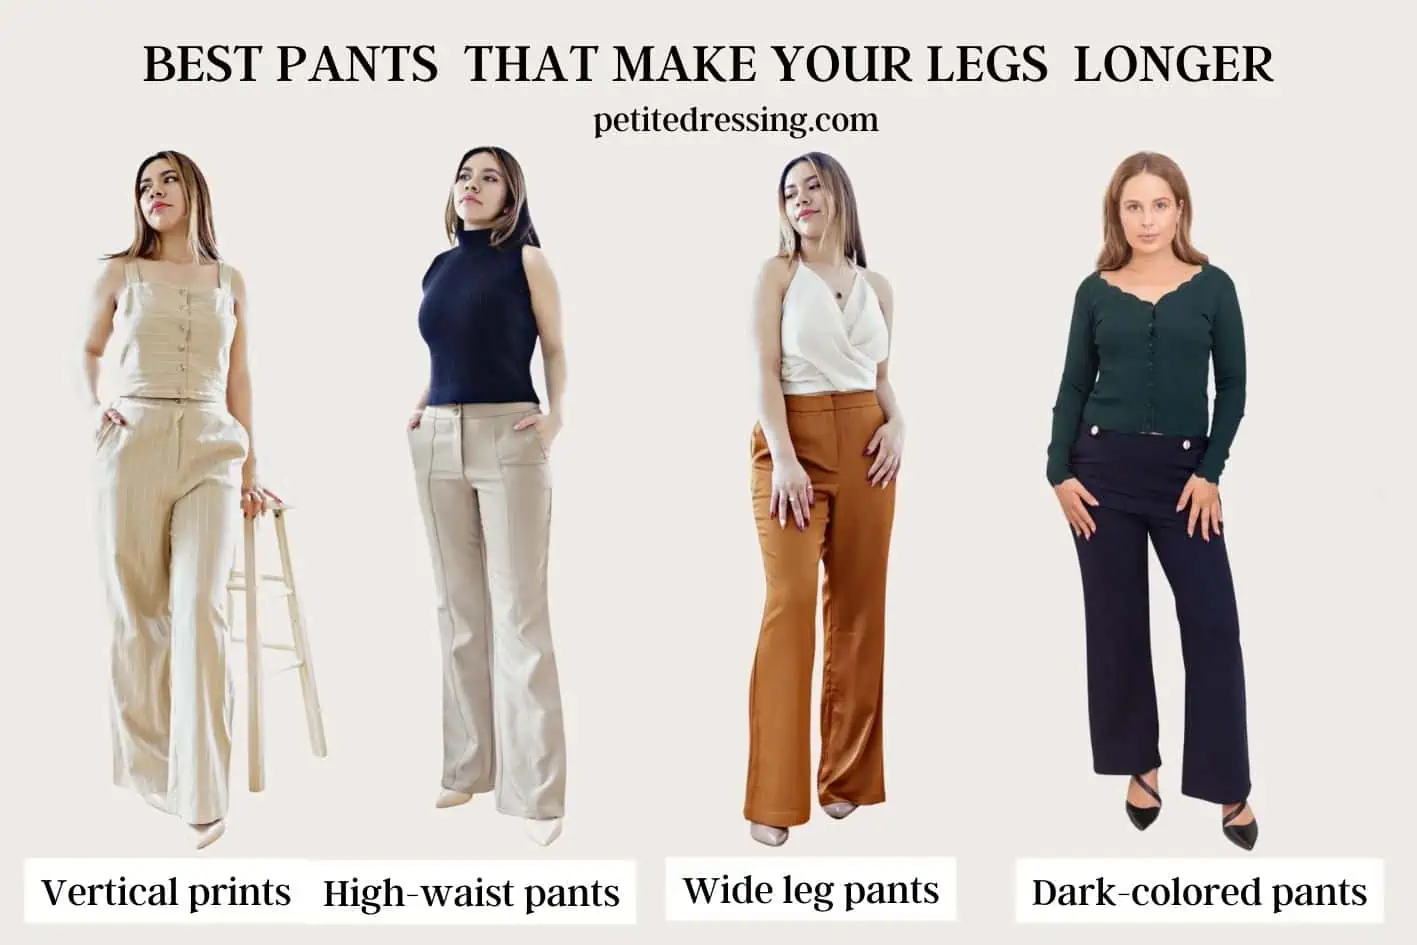 These latex pants make long legs - up to 15 cm more leg length